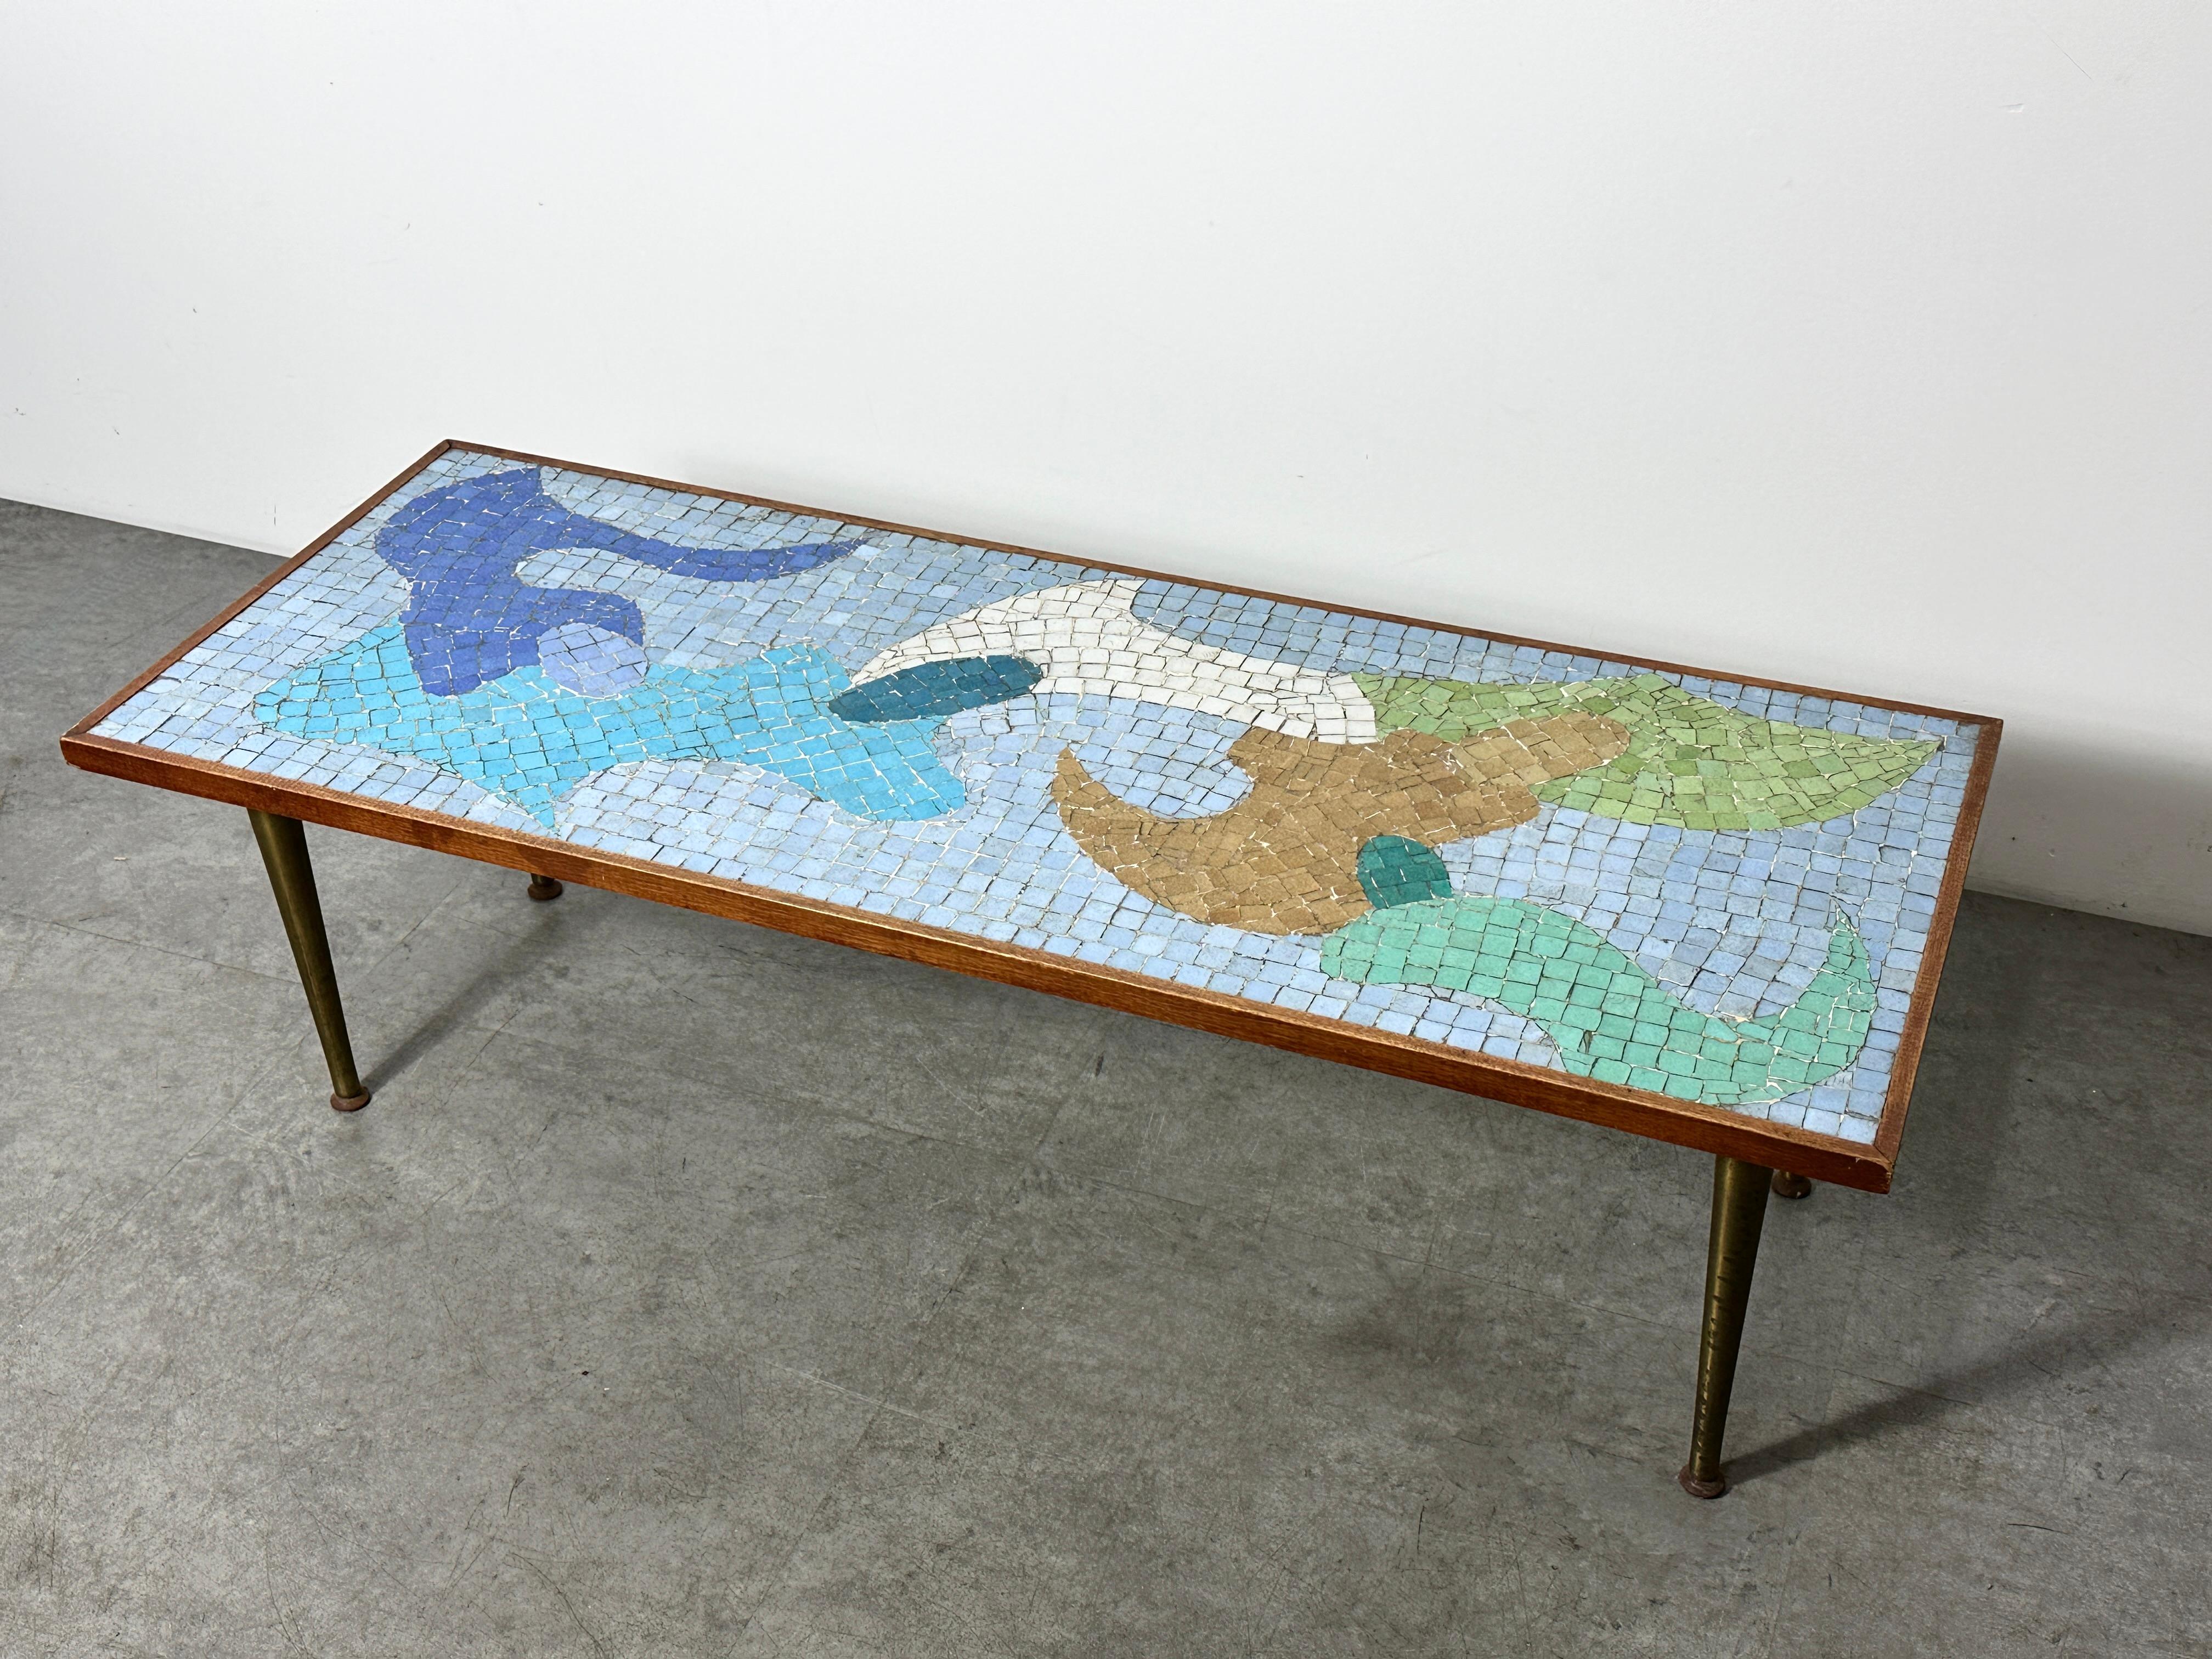 Incredible mosaic tile top coffee table created in the style of Evelyn Ackerman circa 1950s

Abstract modernist design formed of inlaid glass tiles in blues and greens 
Framed in walnut and supported by tapered brass legs

A distinct piece